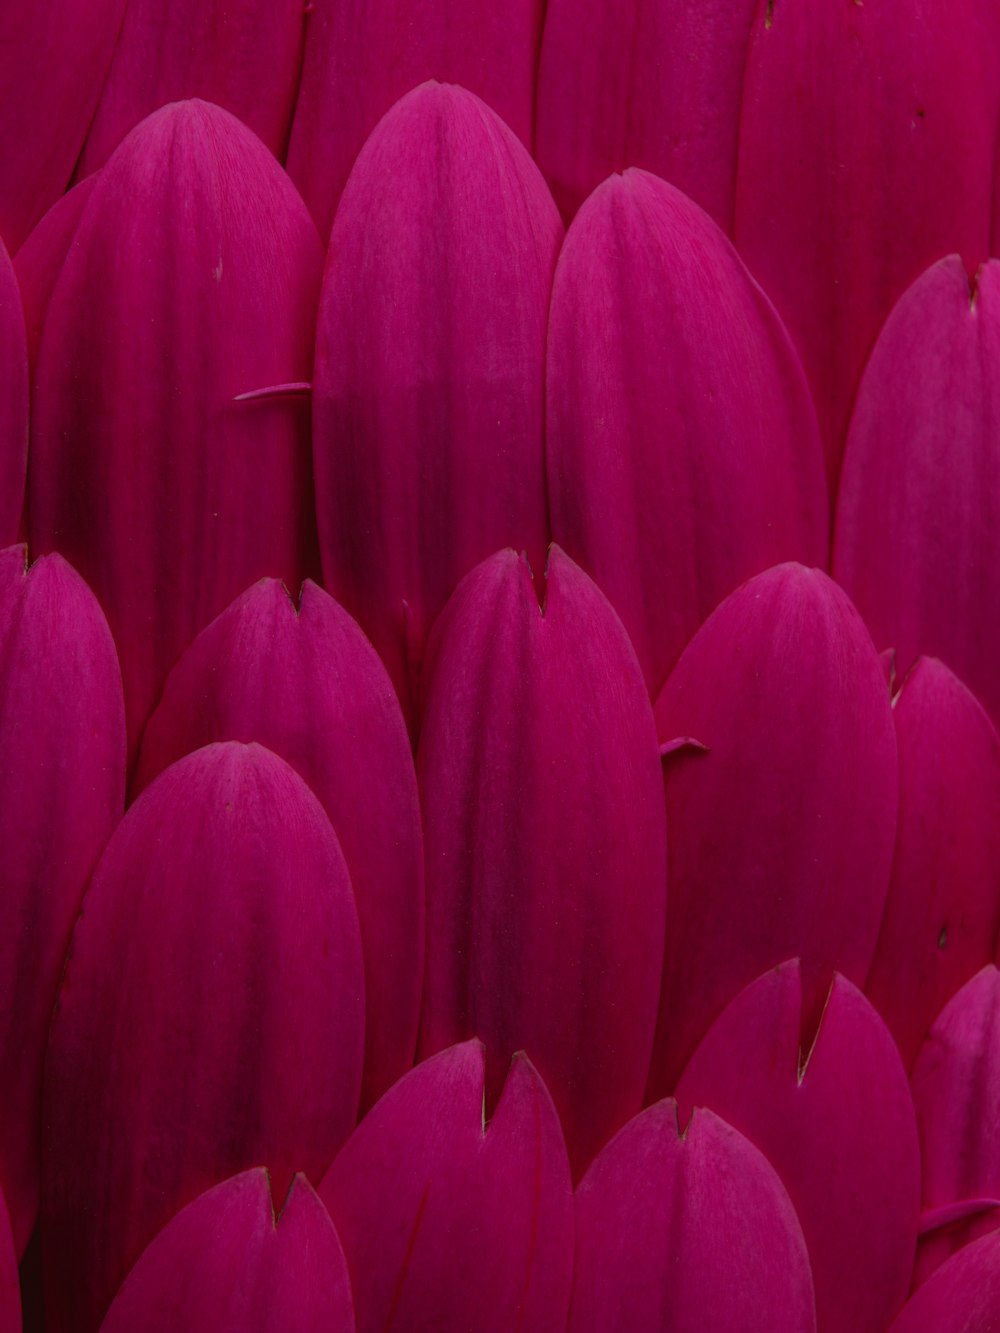 a close up of a bunch of pink flowers